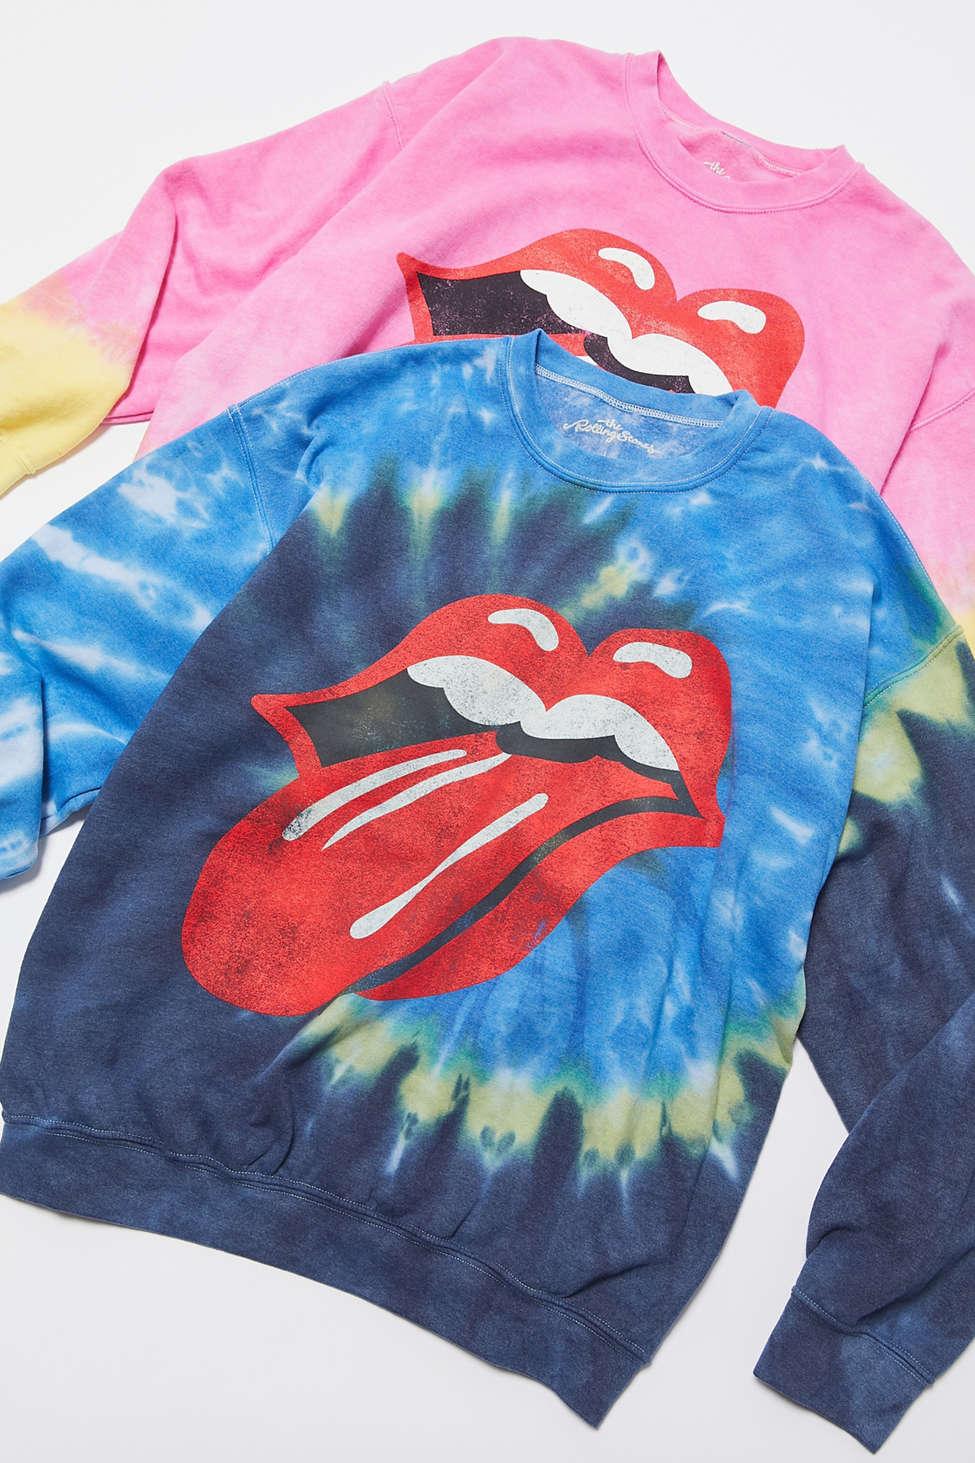 Urban Outfitters The Stones Oversized Sweatshirt in |